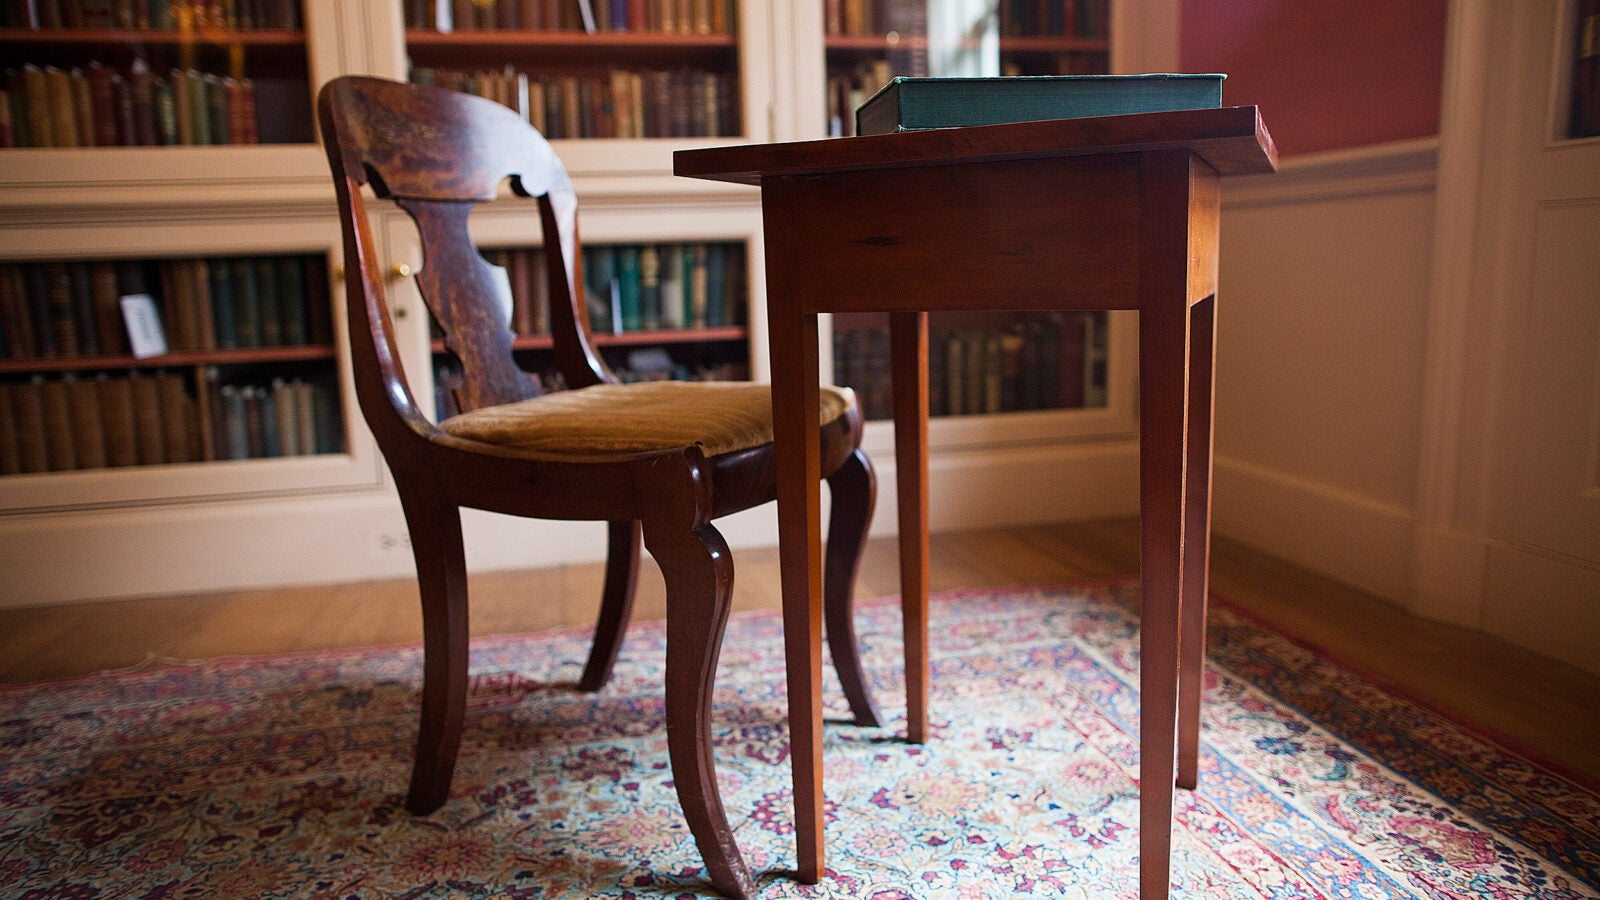 Emily Dickinson's chair and desk